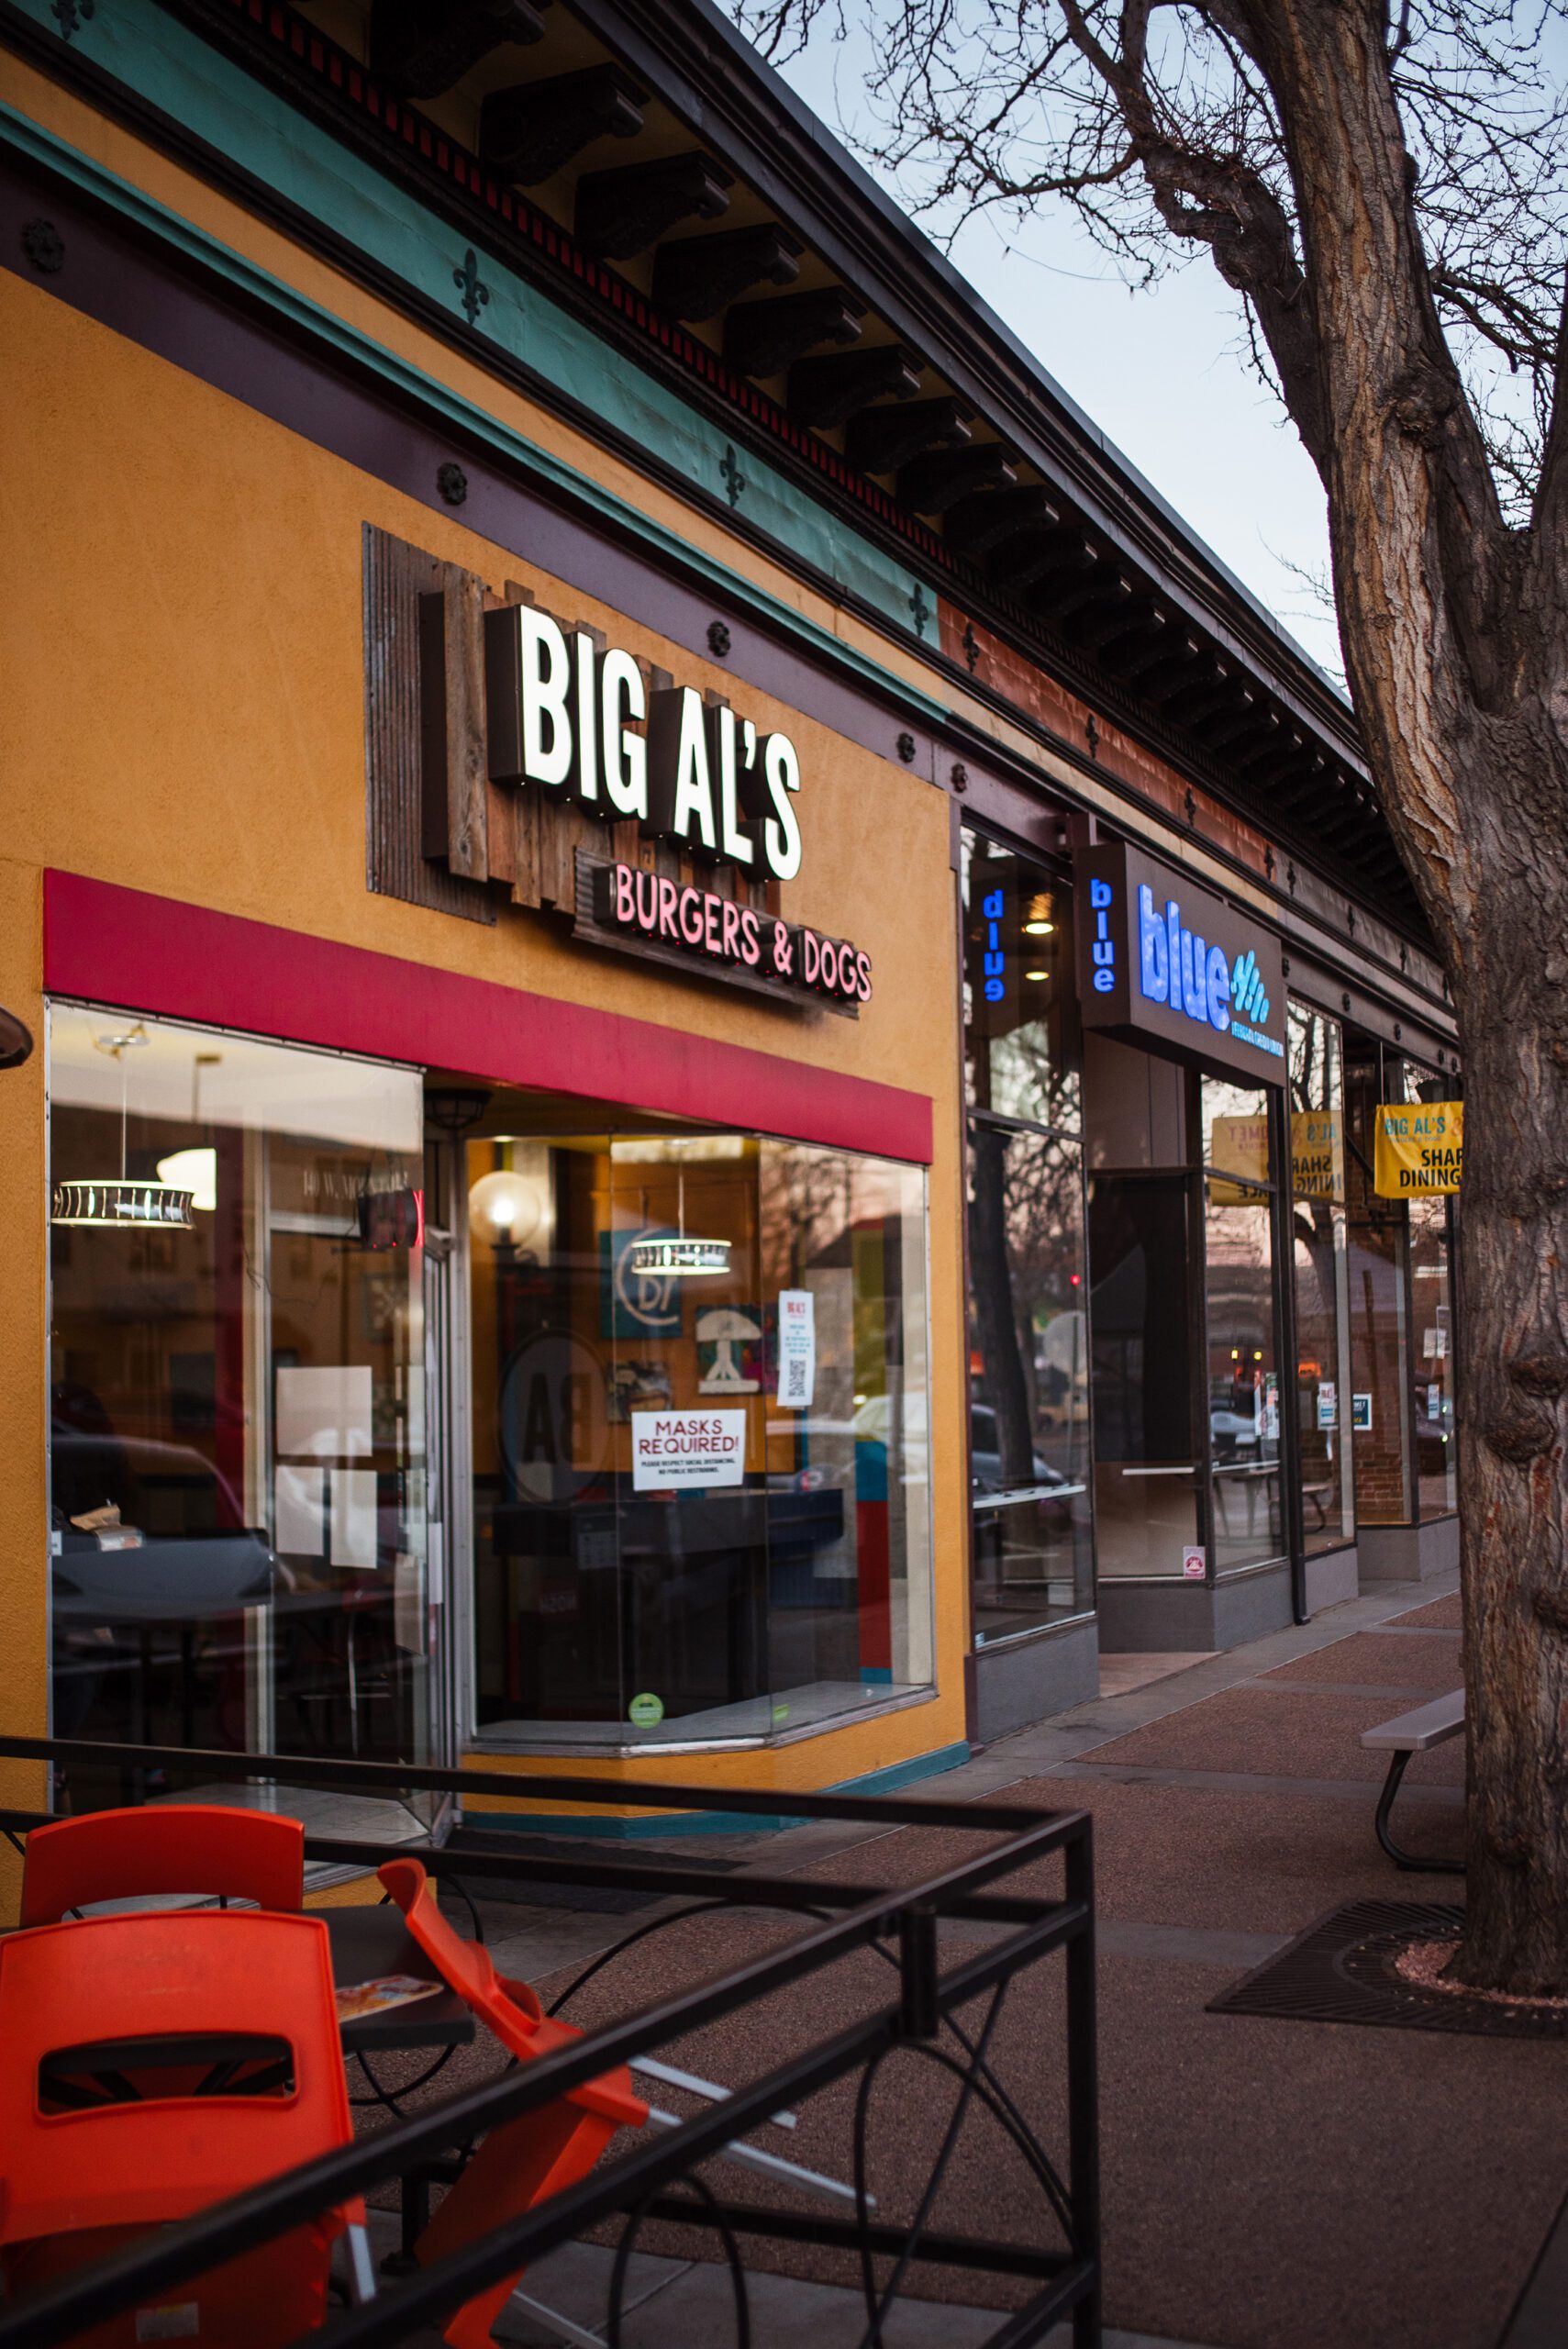 Big Al's Burgers and Dogs in Old Town Fort Collins, also shown is illuminated Blue Credit Union channel letters ign